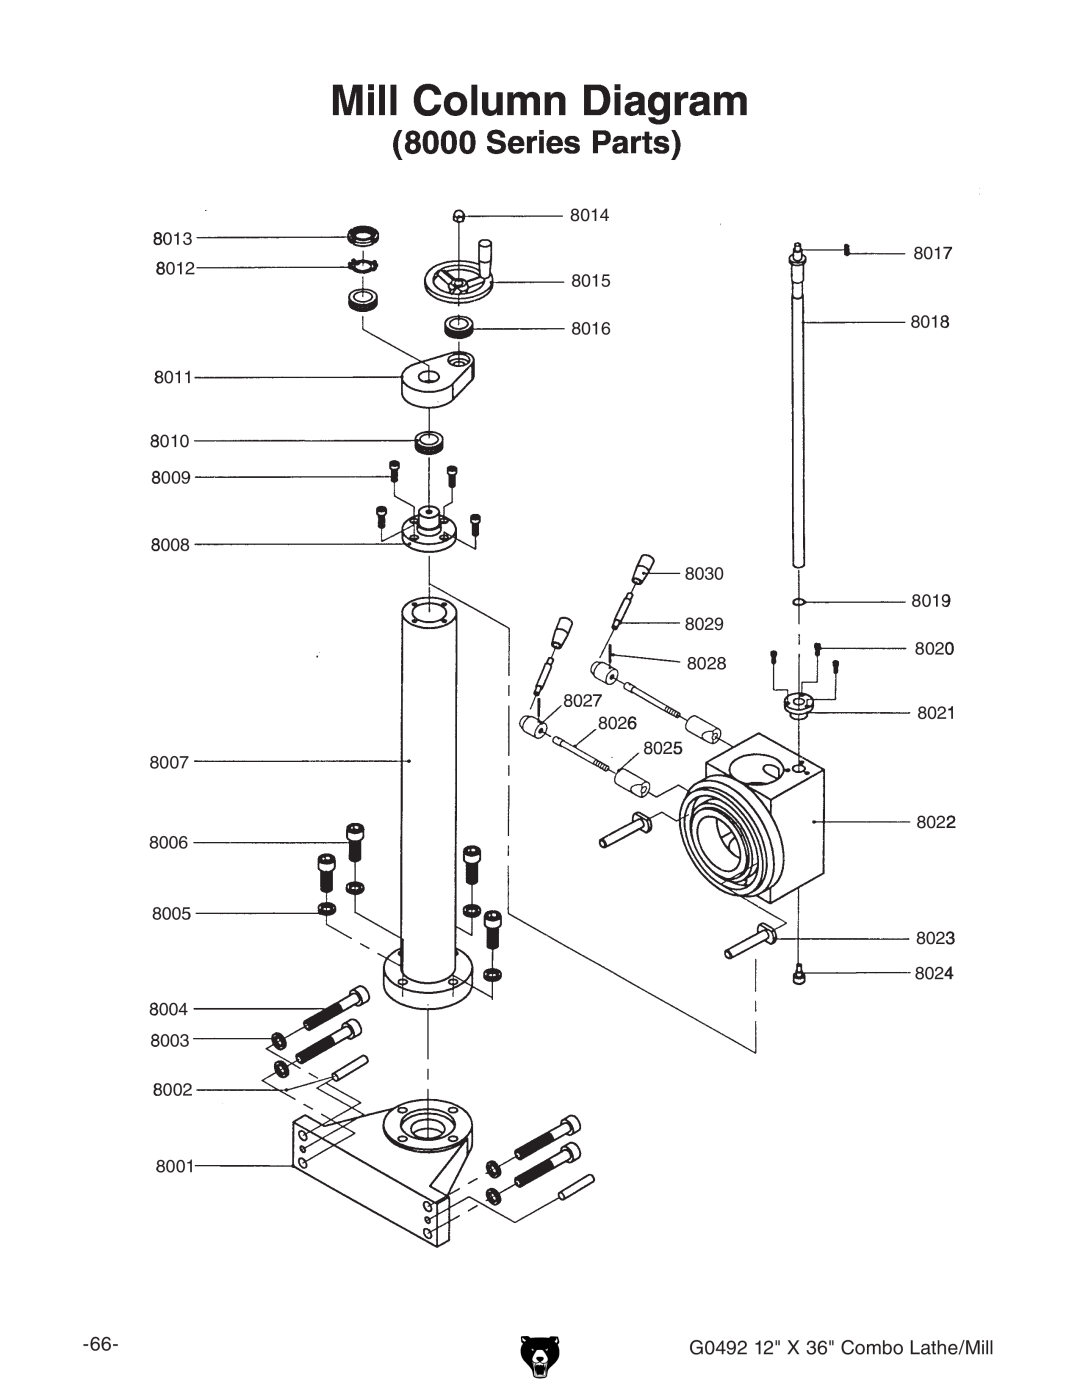 Grizzly G0492 owner manual Mill Column Diagram, Series Parts 